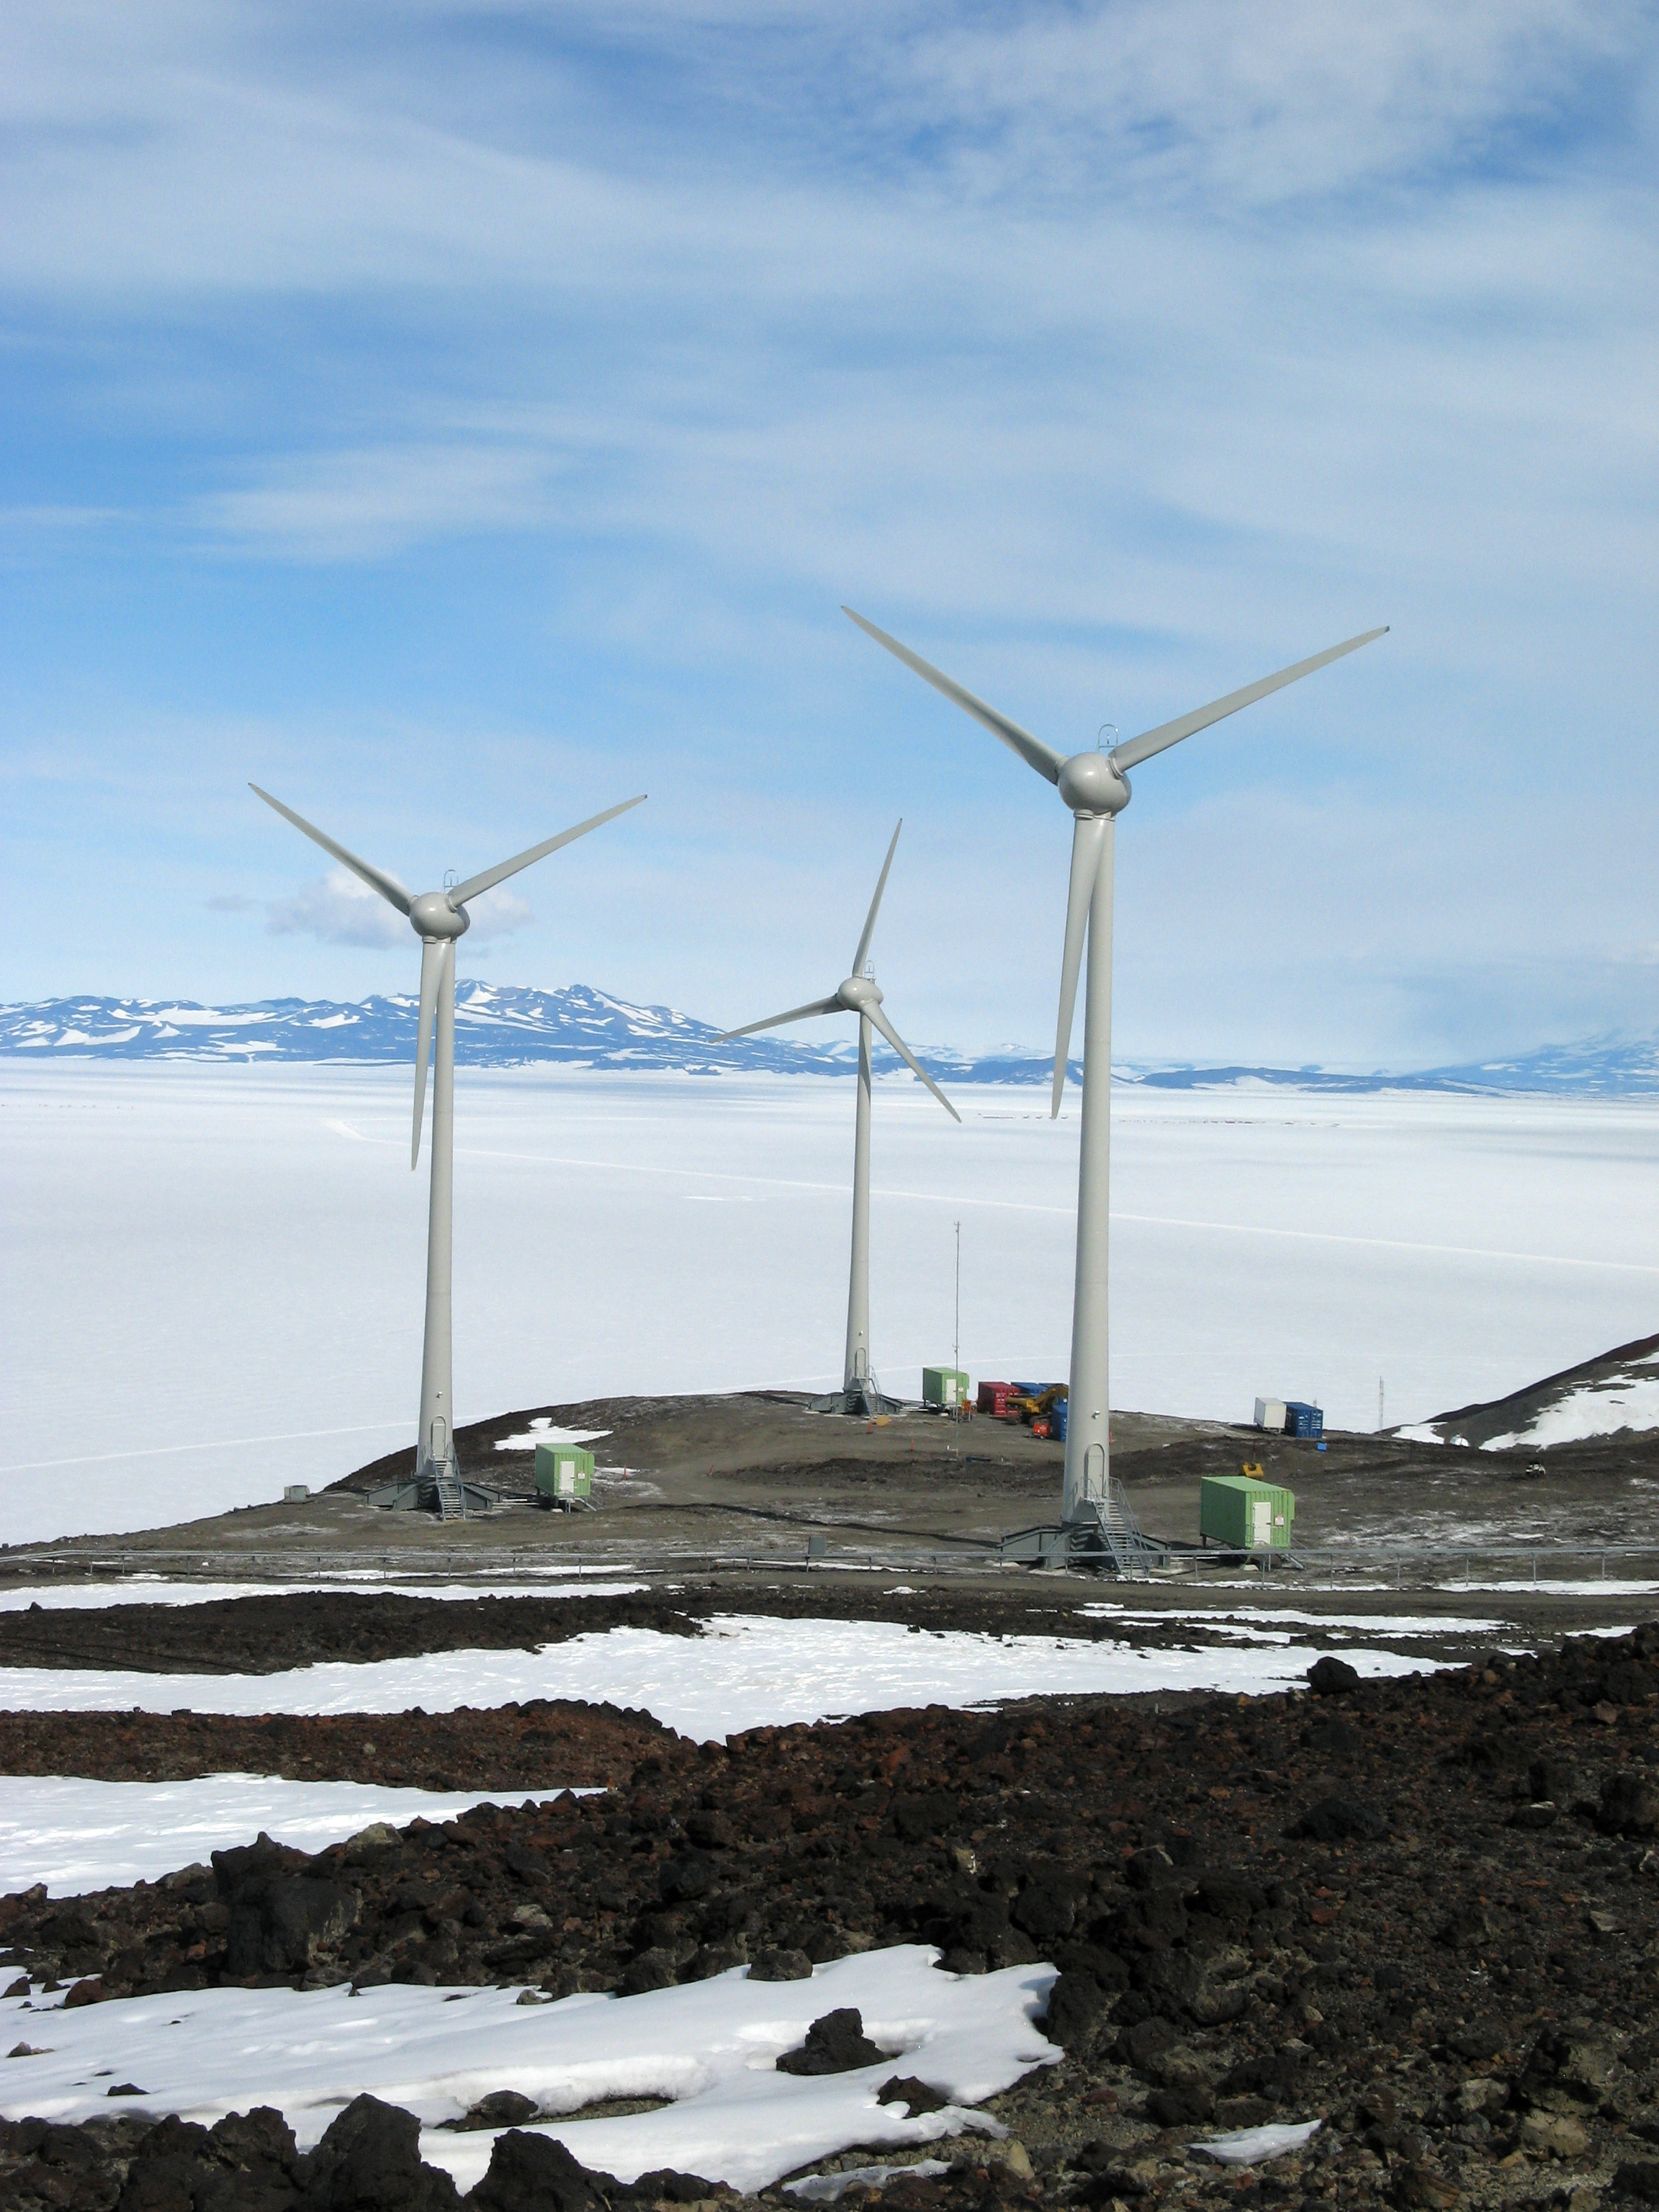 Wind turbines spin near icy place.